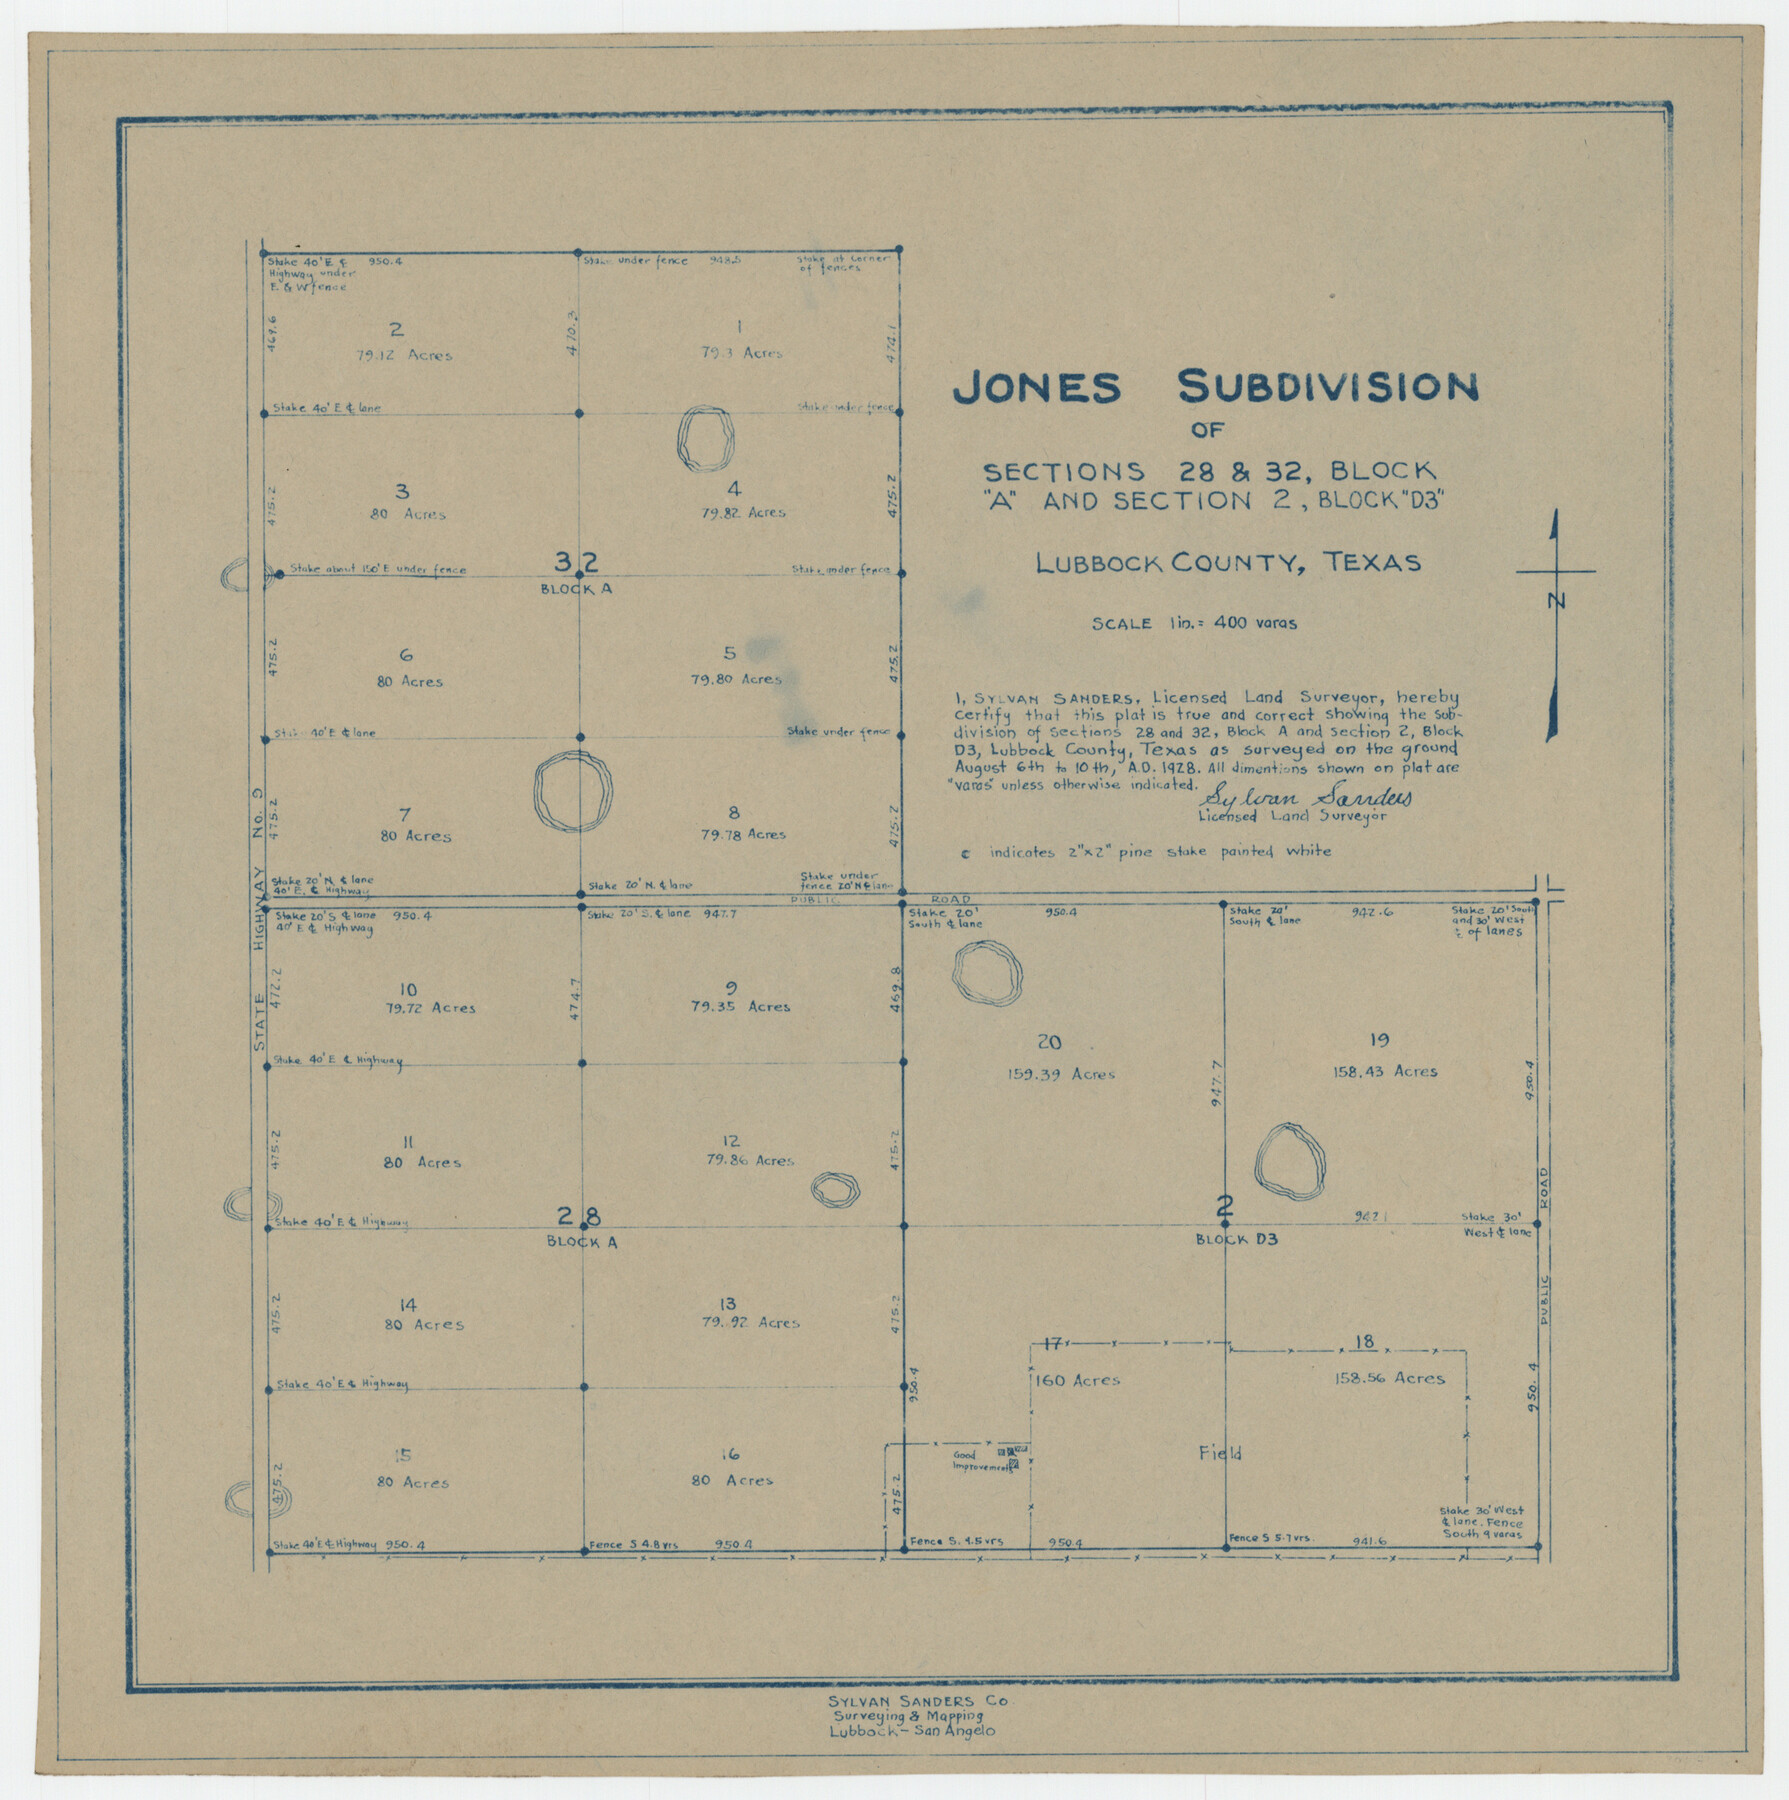 92708, Jones Subdivision of Sections 28 and 32, Block "A' and Section 2, Block "D3", Twichell Survey Records